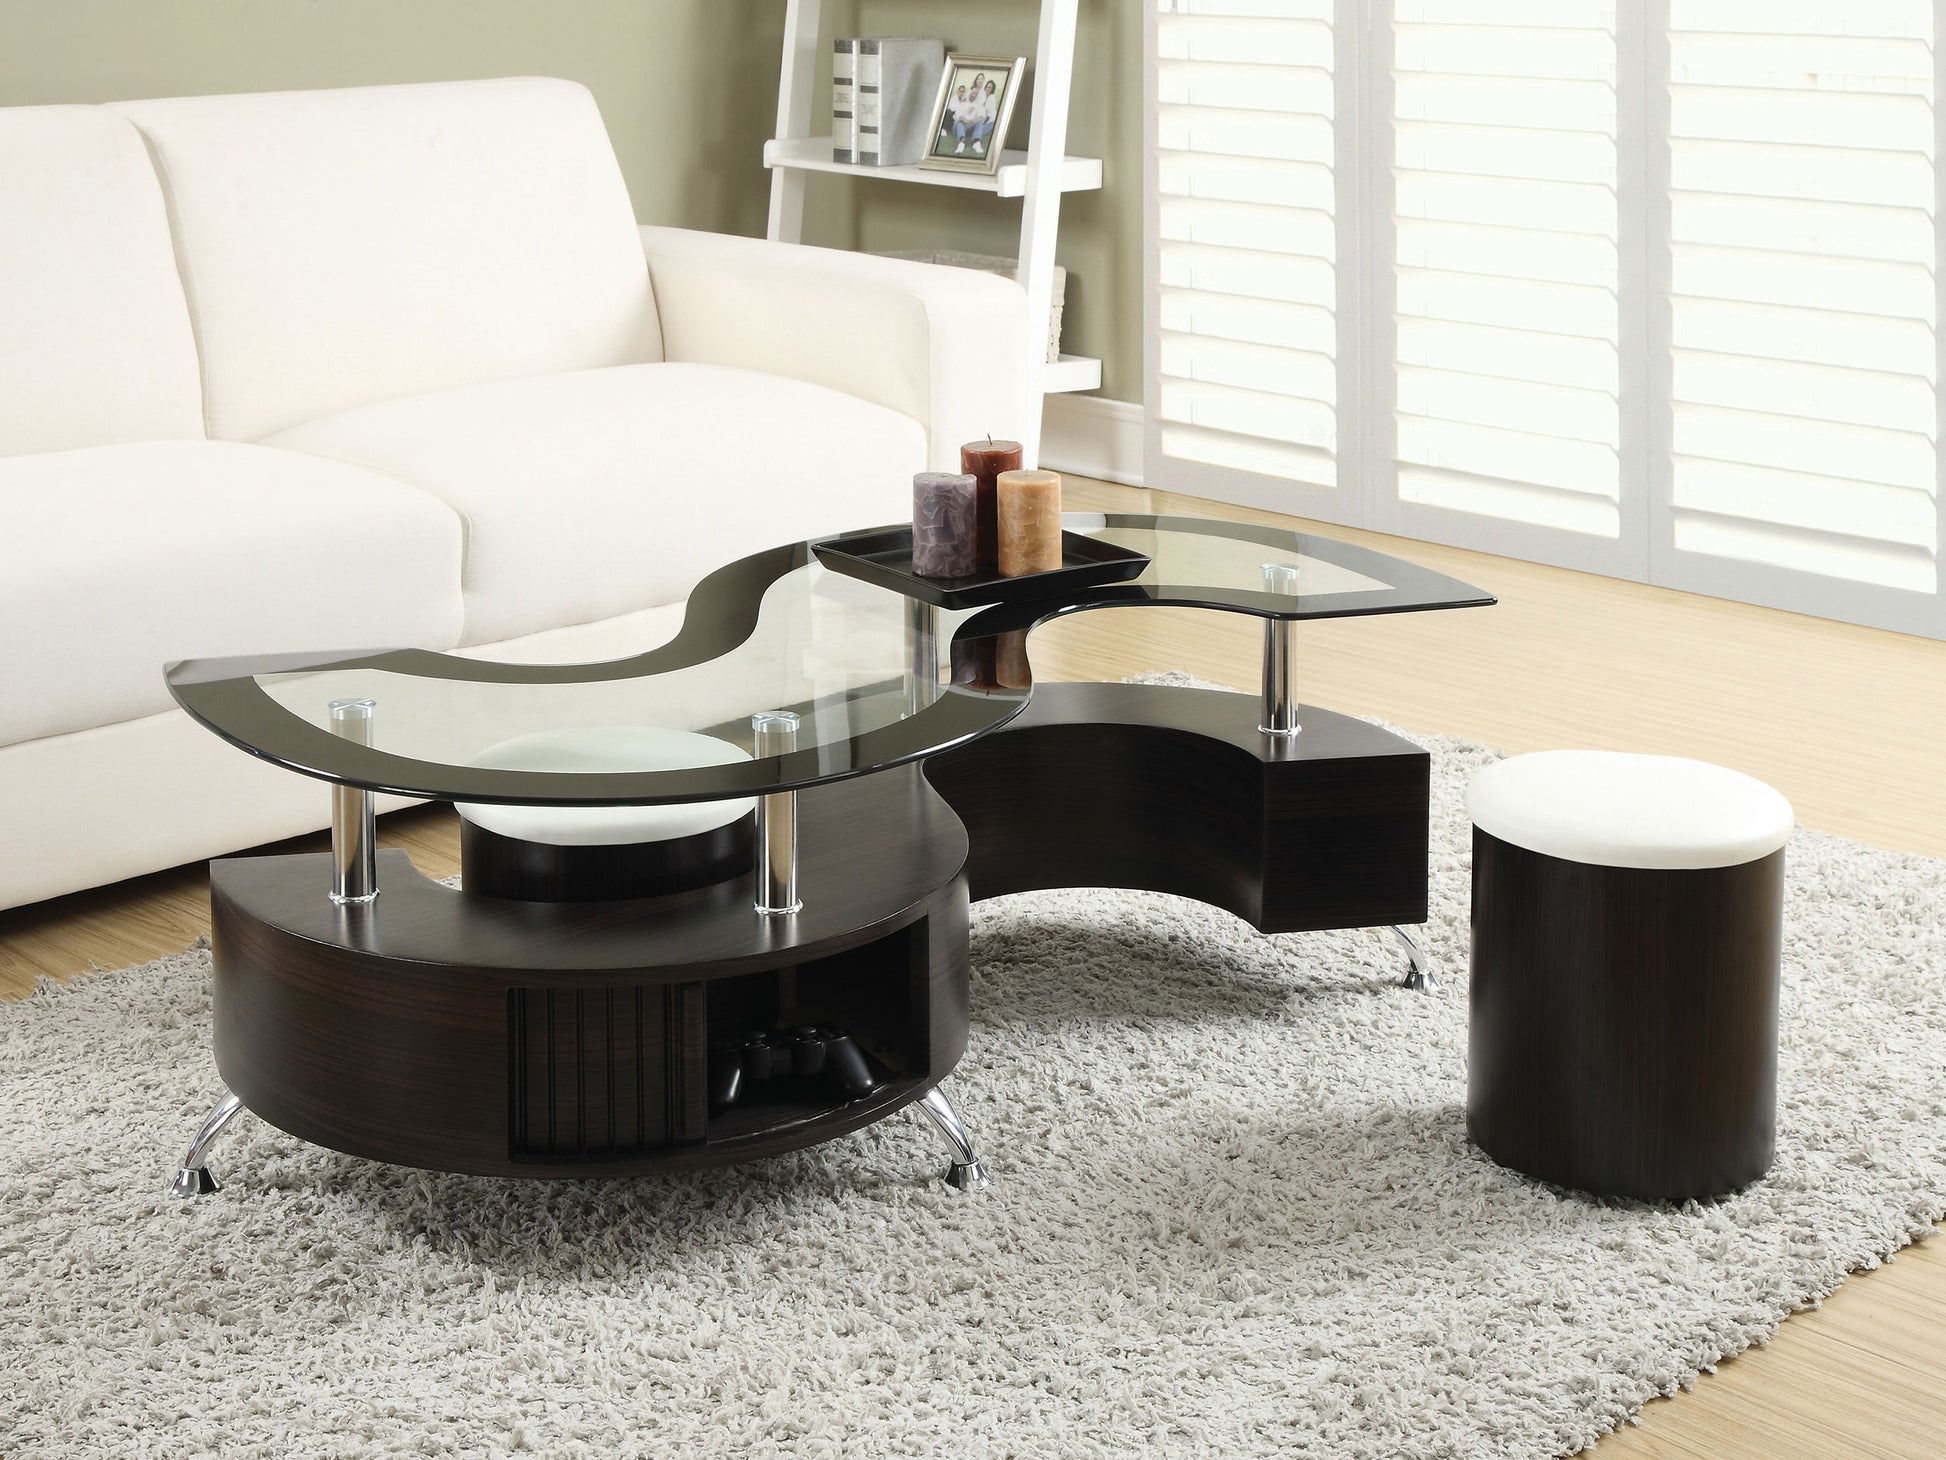 Buckley Curved Glass Top Coffee Table Set with Stools.